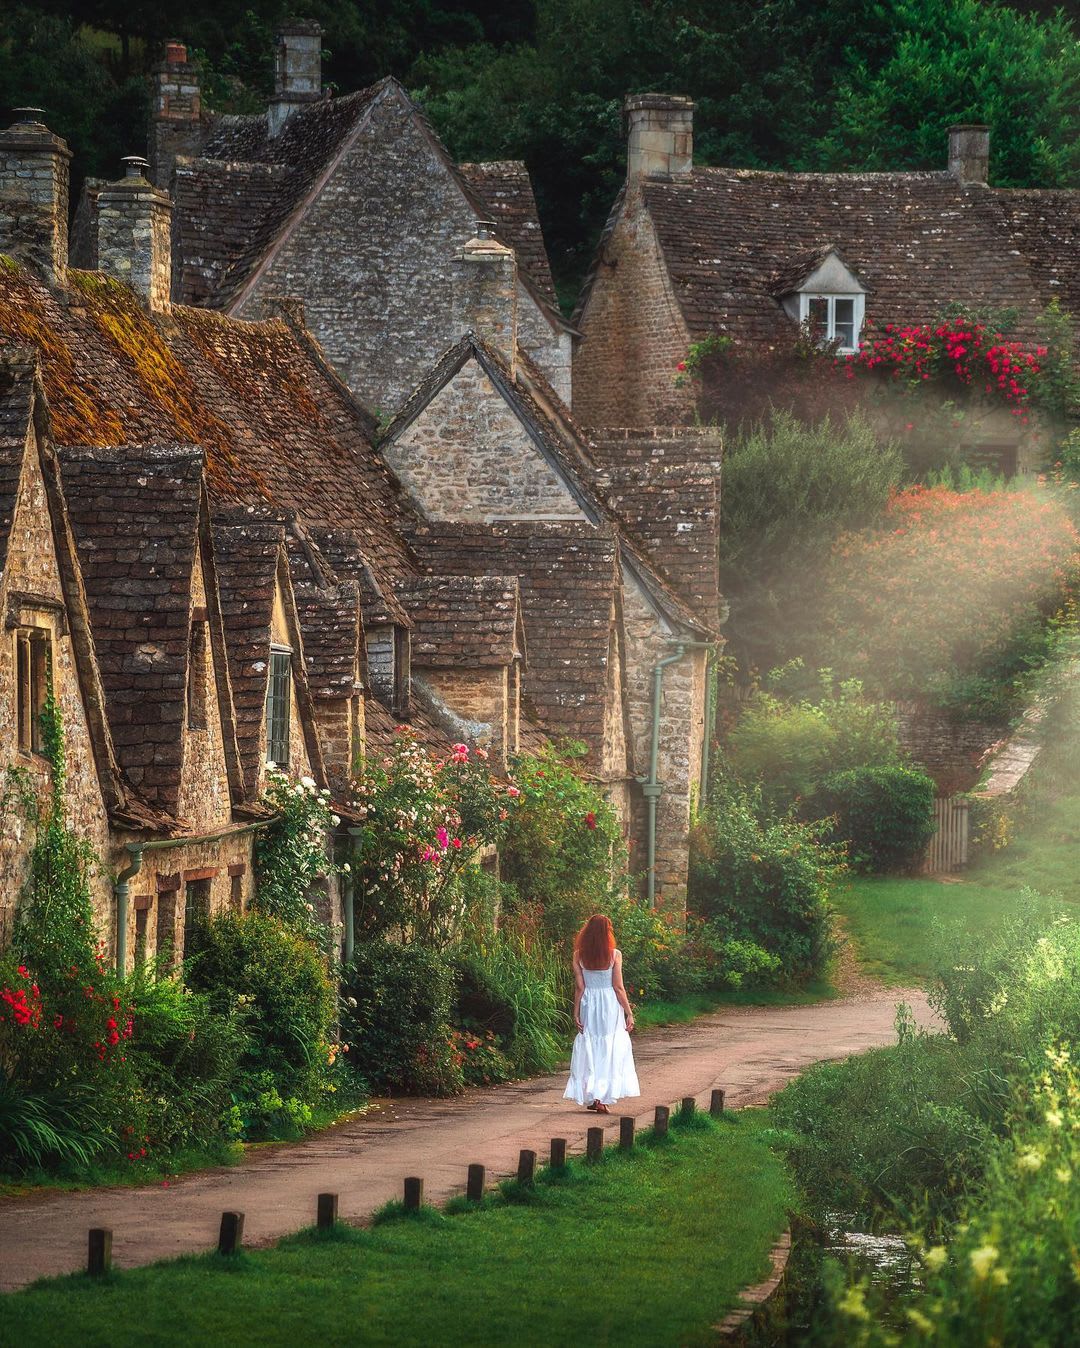 Arlington Row cottages originally built in the 14th century in Arlington, a small Cotswolds village of Bibury, Gloucestershire, England.